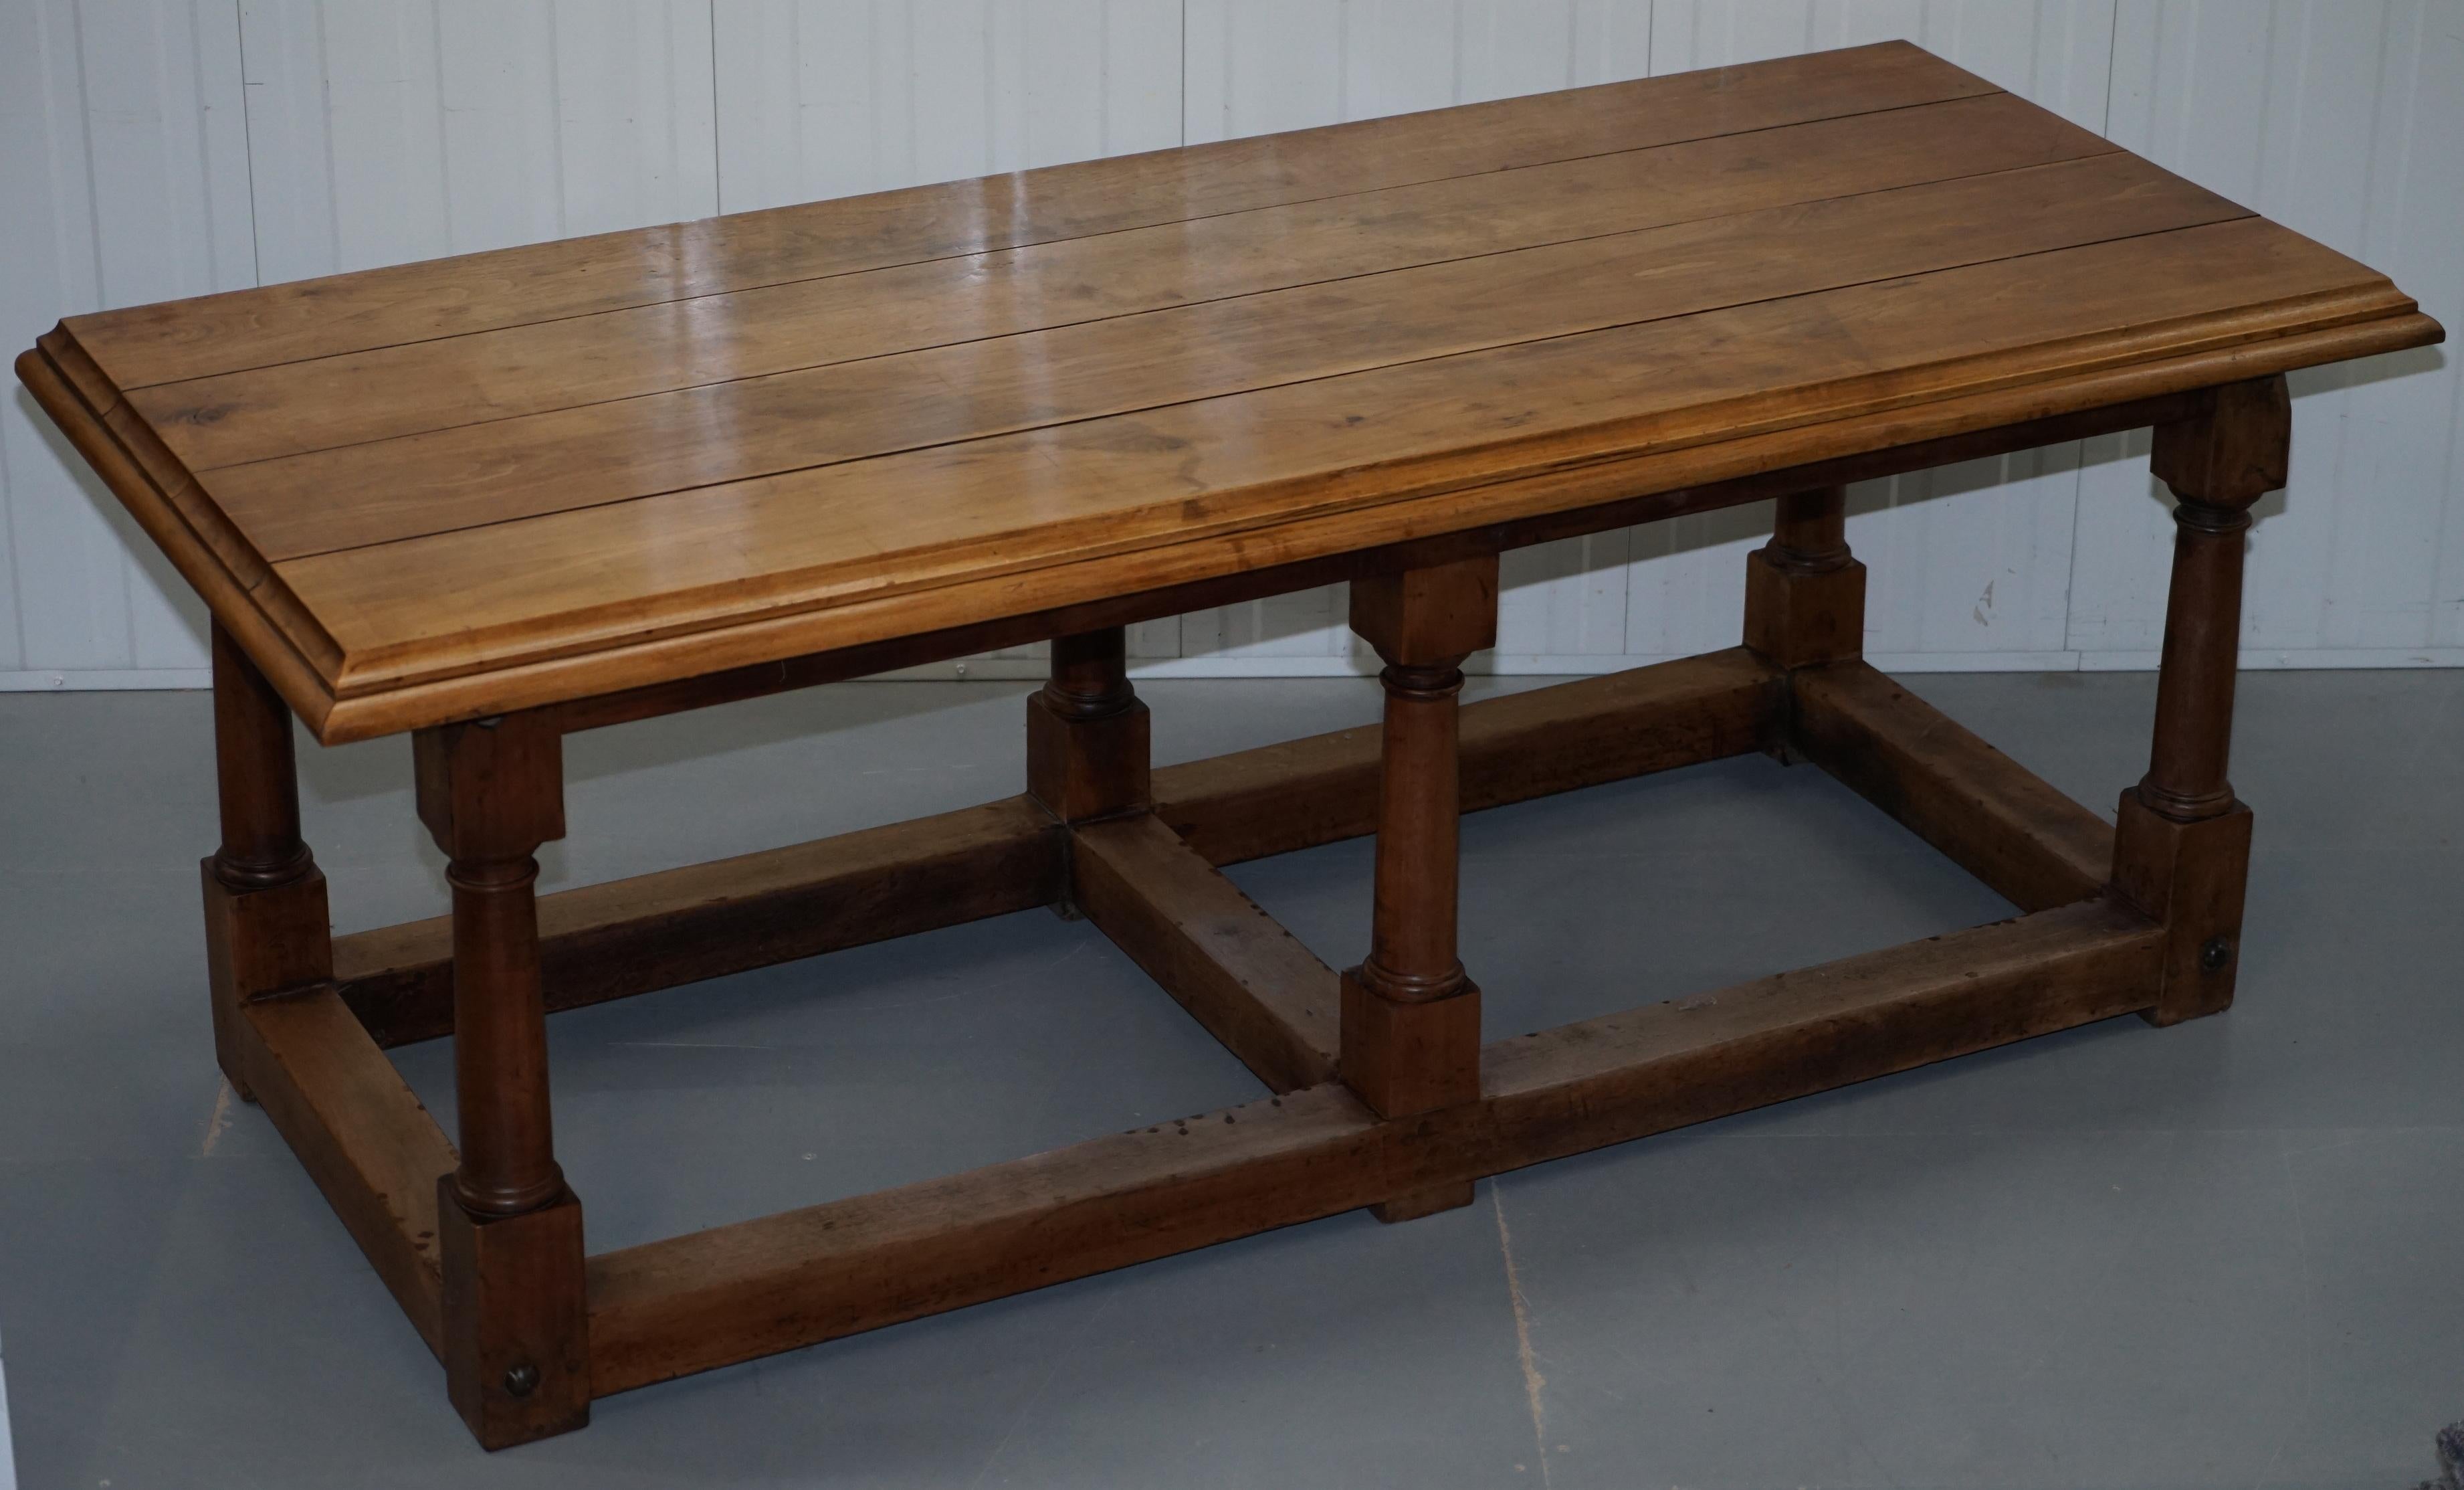 We are delighted to offer for sale this lovely 17th-century style French walnut Victorian refectory dining table with planked top

Please note the delivery fee listed is just a guide, it covers within the M25 only

A very good looking and